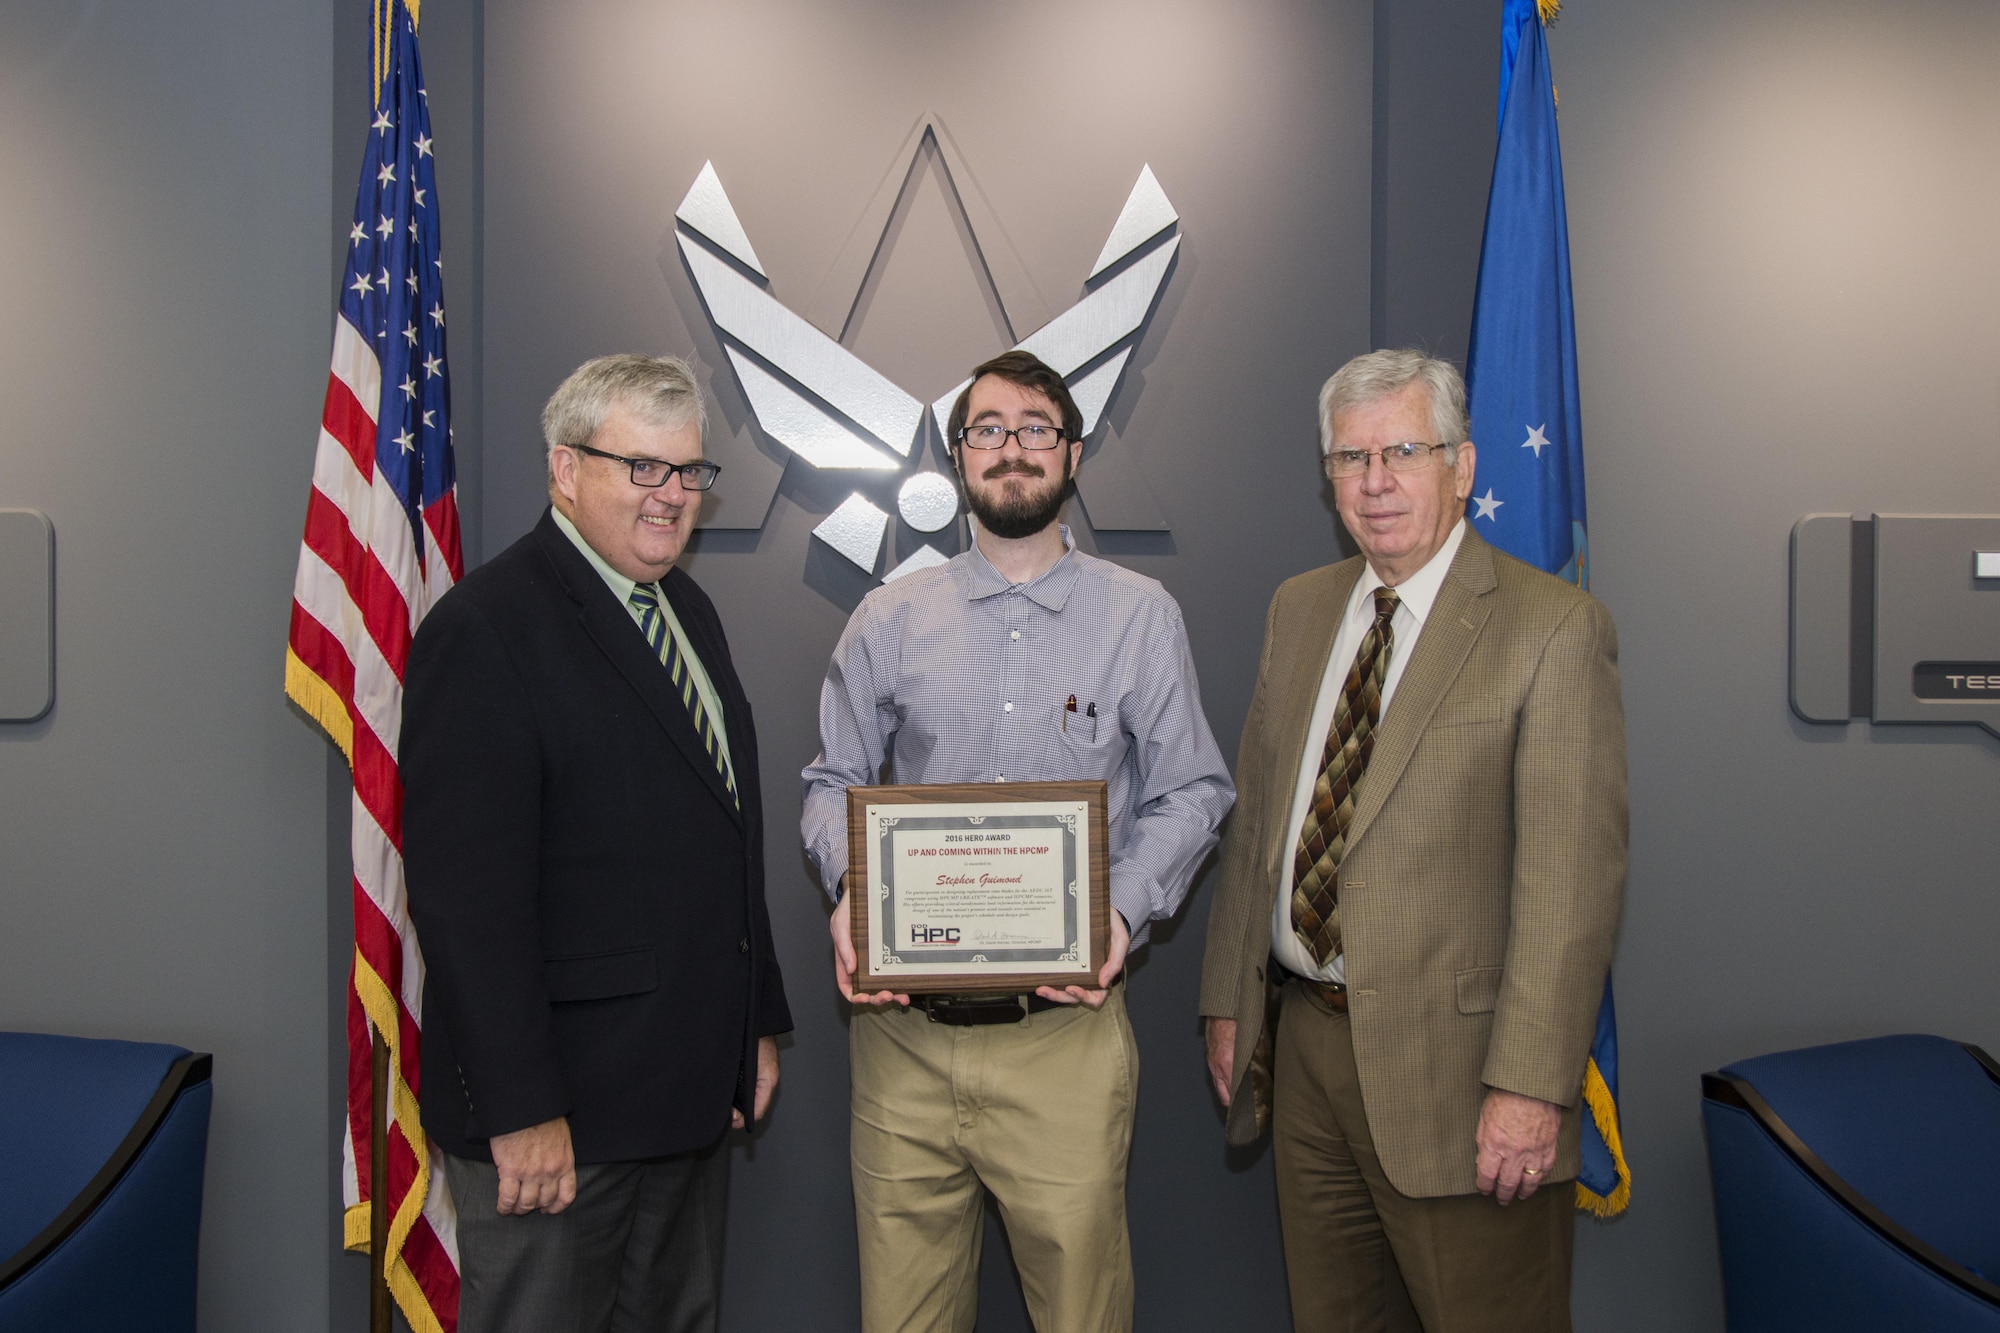 AEDC Scientist and Engineer Stephen Guimond (center) accepts the 2016 Hero Award for the Up and Coming within the Department of Defense High Performance Computing Modernization Program, or HPCMP, from Dr. Kevin Newmeyer (left), chief of staff of the DOD HPCMP, Oct. 17, 2016. Accompanying Guimond is the Air Force Test Center, AEDC Chief Technologist Dr. Edward Kraft. (U.S. Air Force photo/Jacqueline Cowan)